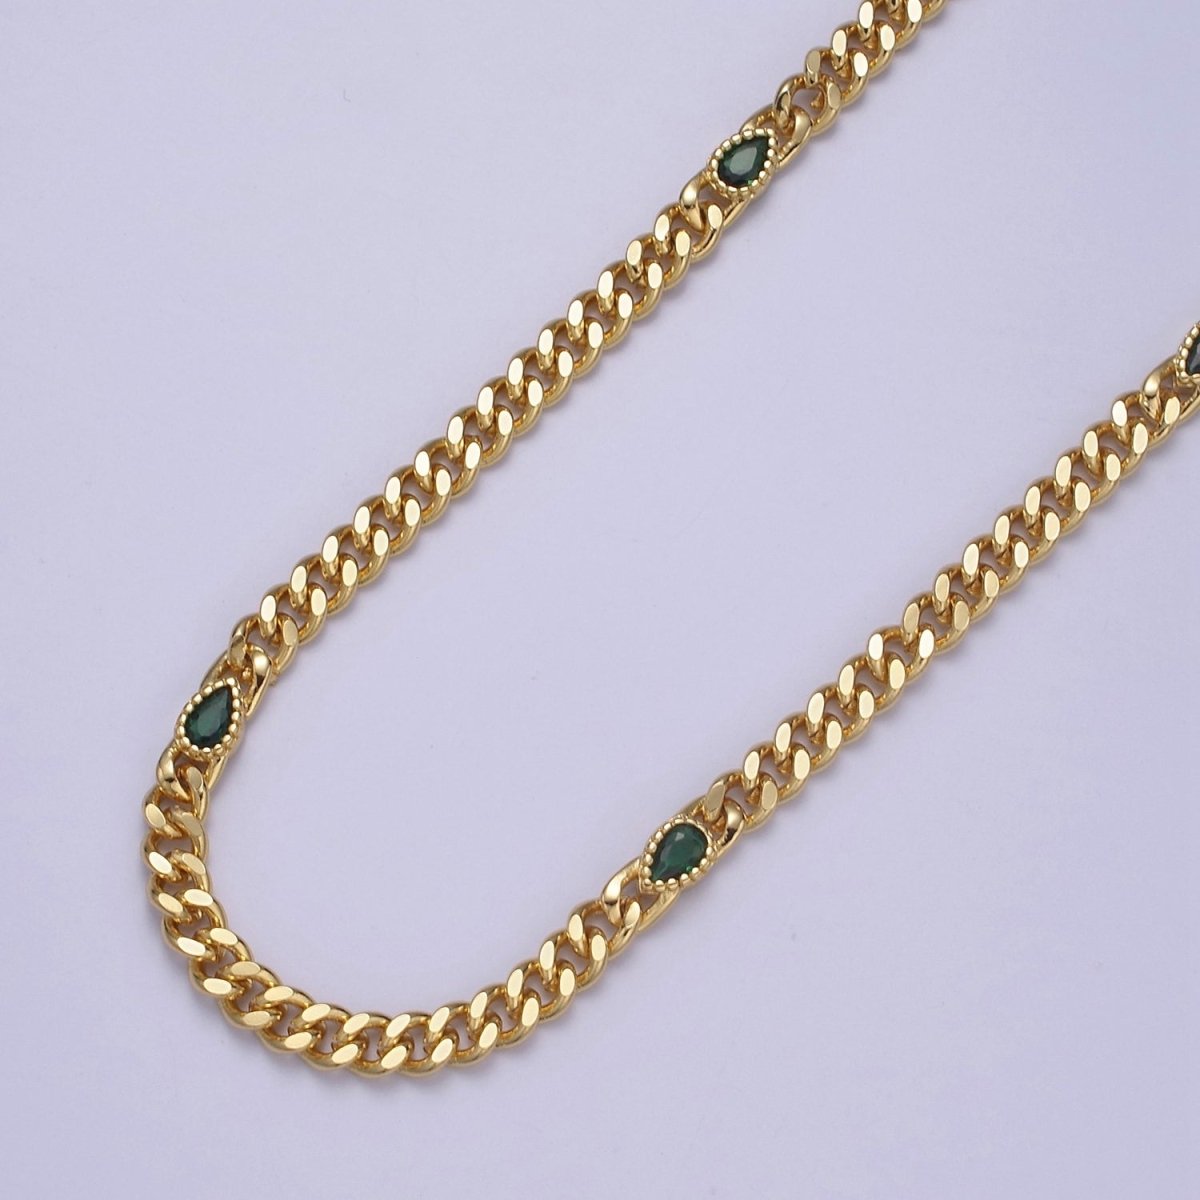 24K Gold Filled Flat Curb Chain with Crystal Cubic Zirconia CZ Teardrop Connector, 4.5mm in Width Unfinished Curb Chain by Meter | O-081 ~ O-083 O-090 WA-1364 Clearance Pricing - DLUXCA